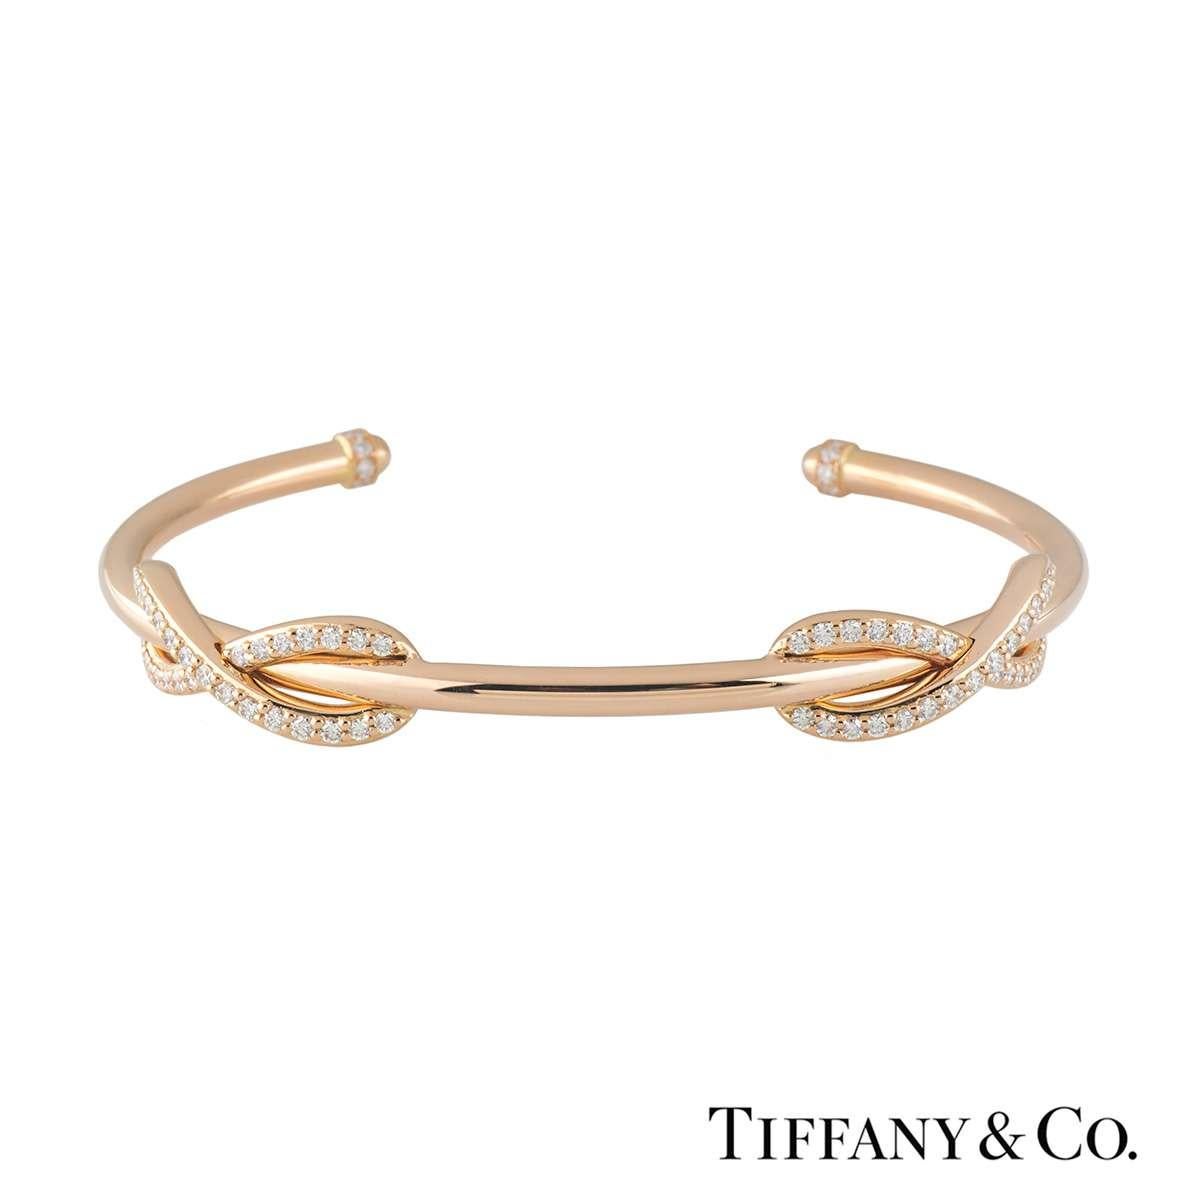 A stylish 18k rose gold diamond Tiffany & Co. cuff bangle from the Infinity collection. The bangle comprises of 2 infinity symbols encrusted with round brilliant cut diamonds totalling 0.65ct. The bangle would fit a wrist size of up to 6 inches and